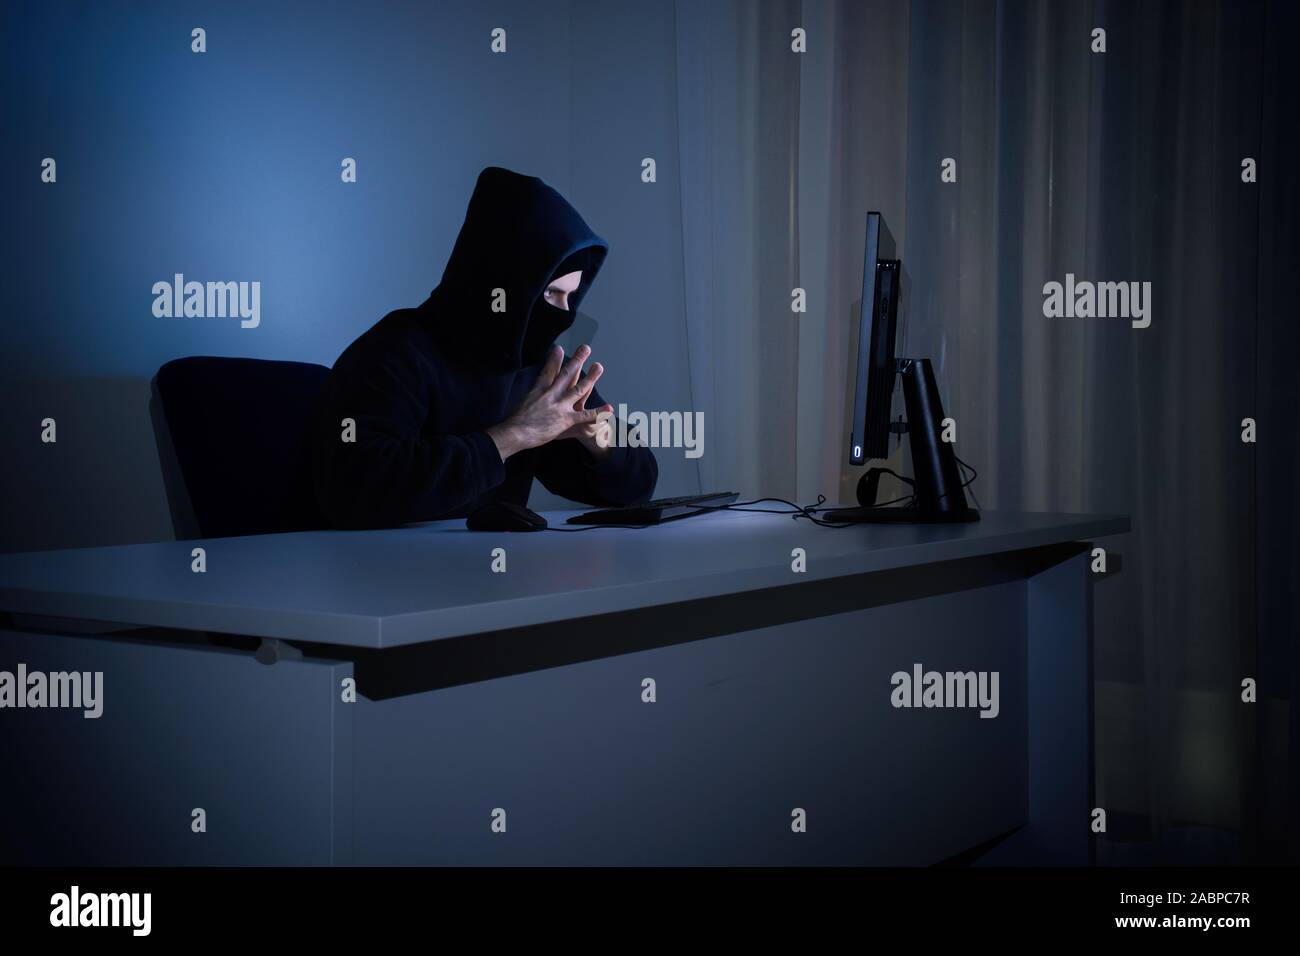 Masked hacker in front at computer into dark room represents the danger of surfing the internet. Internet security concept. Stock Photo